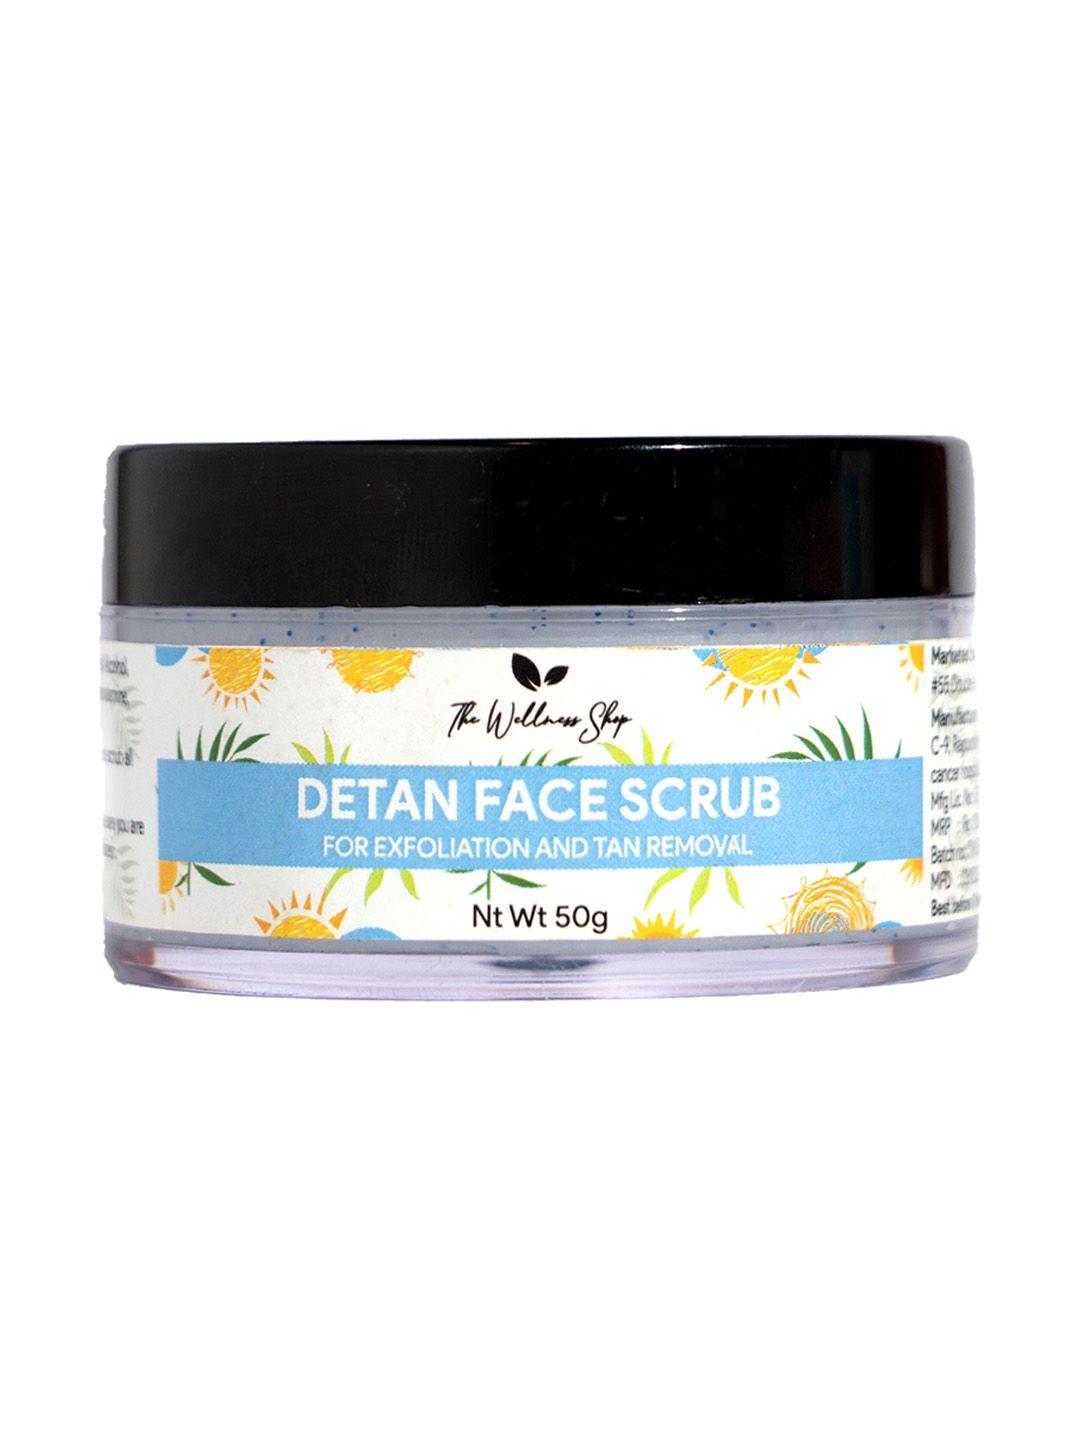 the wellness shop detan face scrub for exfoliation and tan removal - 50g